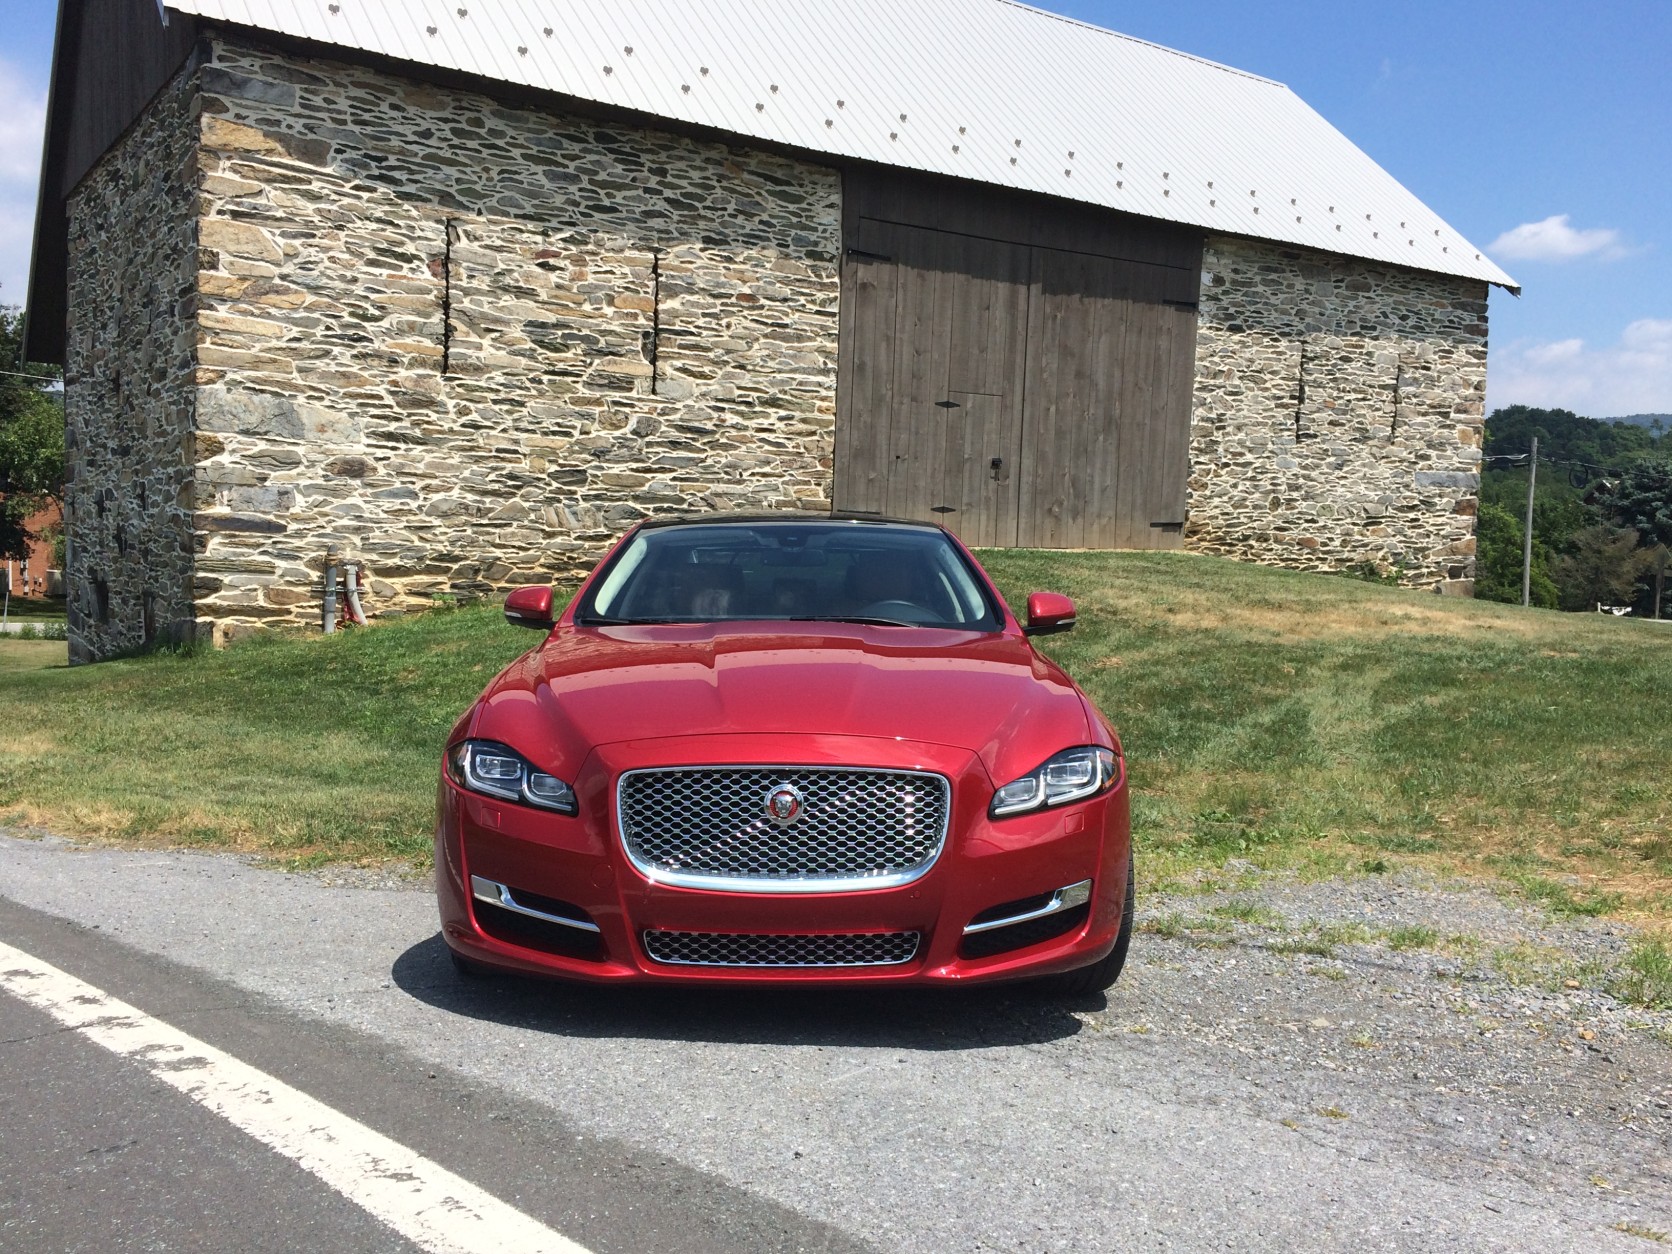 The 2016 Jaguar XJL Portfolio has new headlights and a new tail light design.  (WTOP/Mike Parris)